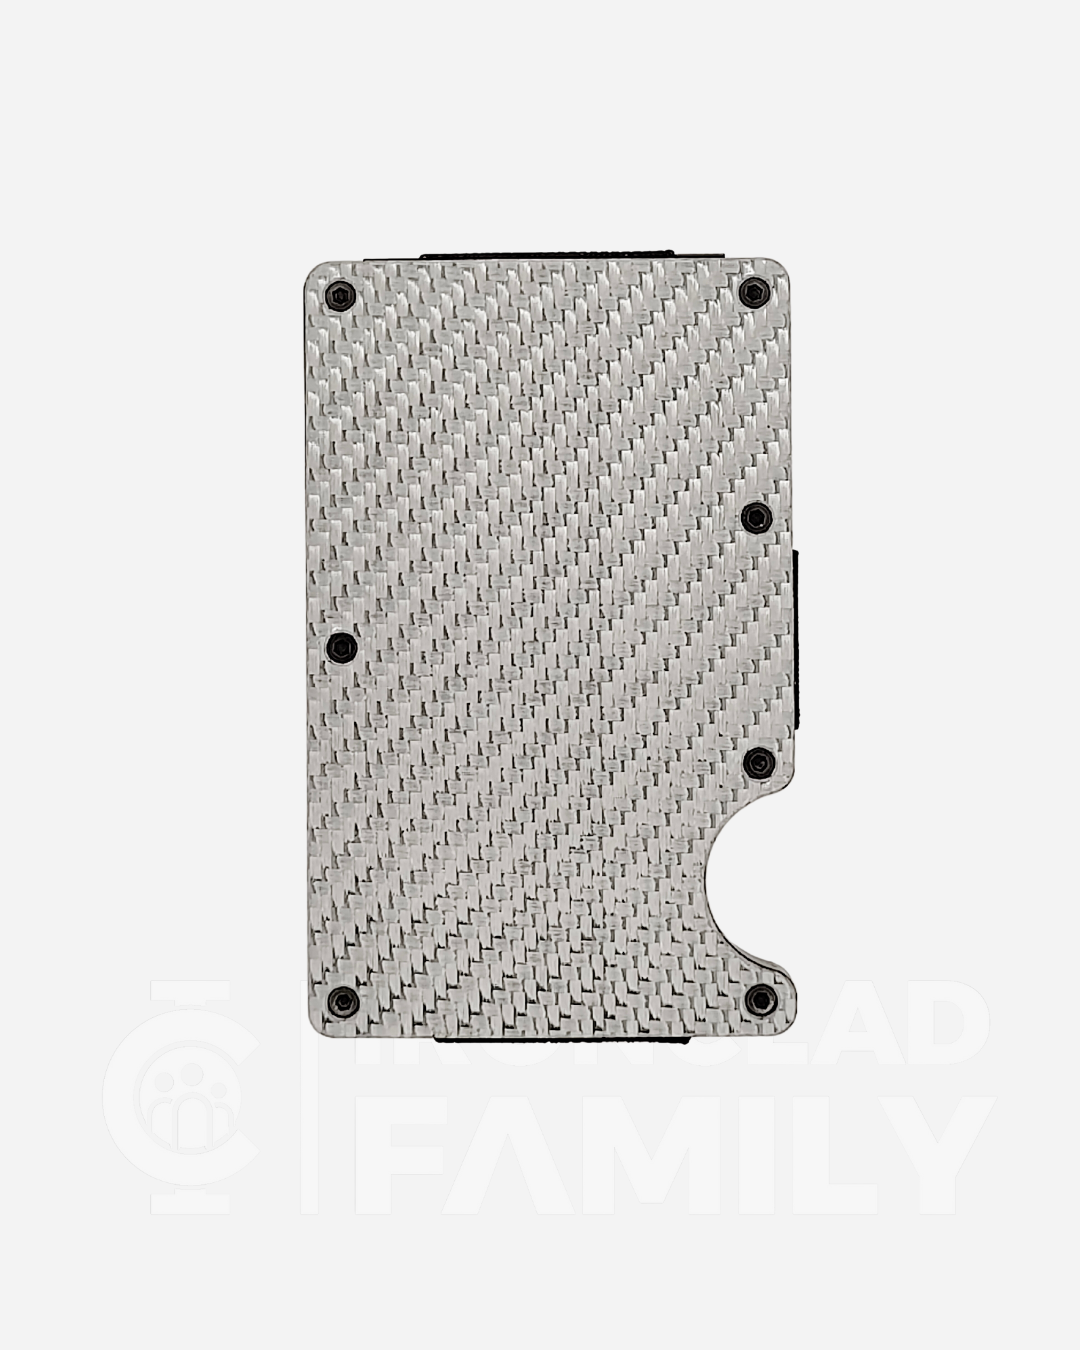 Carbon fiber wallet featuring a sleek silver casing for protection